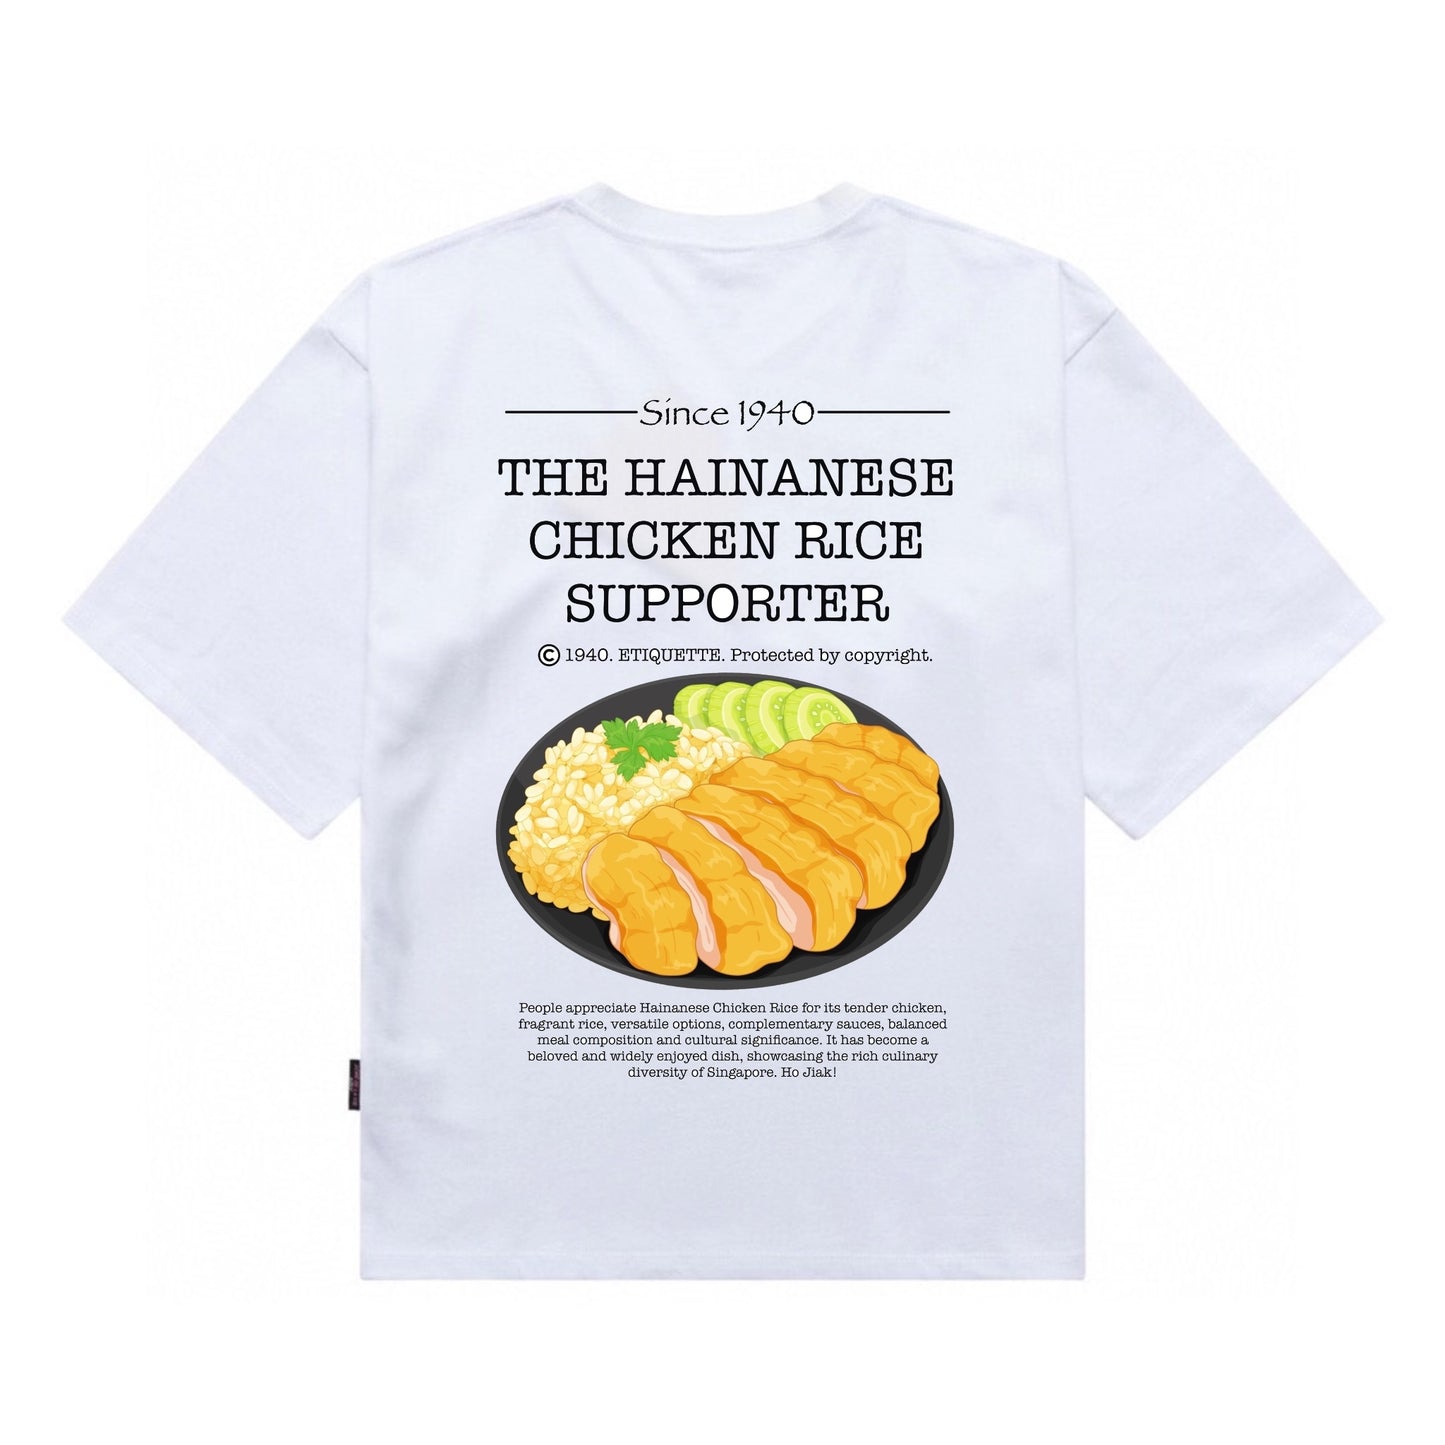 [étiquette d'amour] The Hainanese Chicken Rice Supporter Premium Oversize Tee